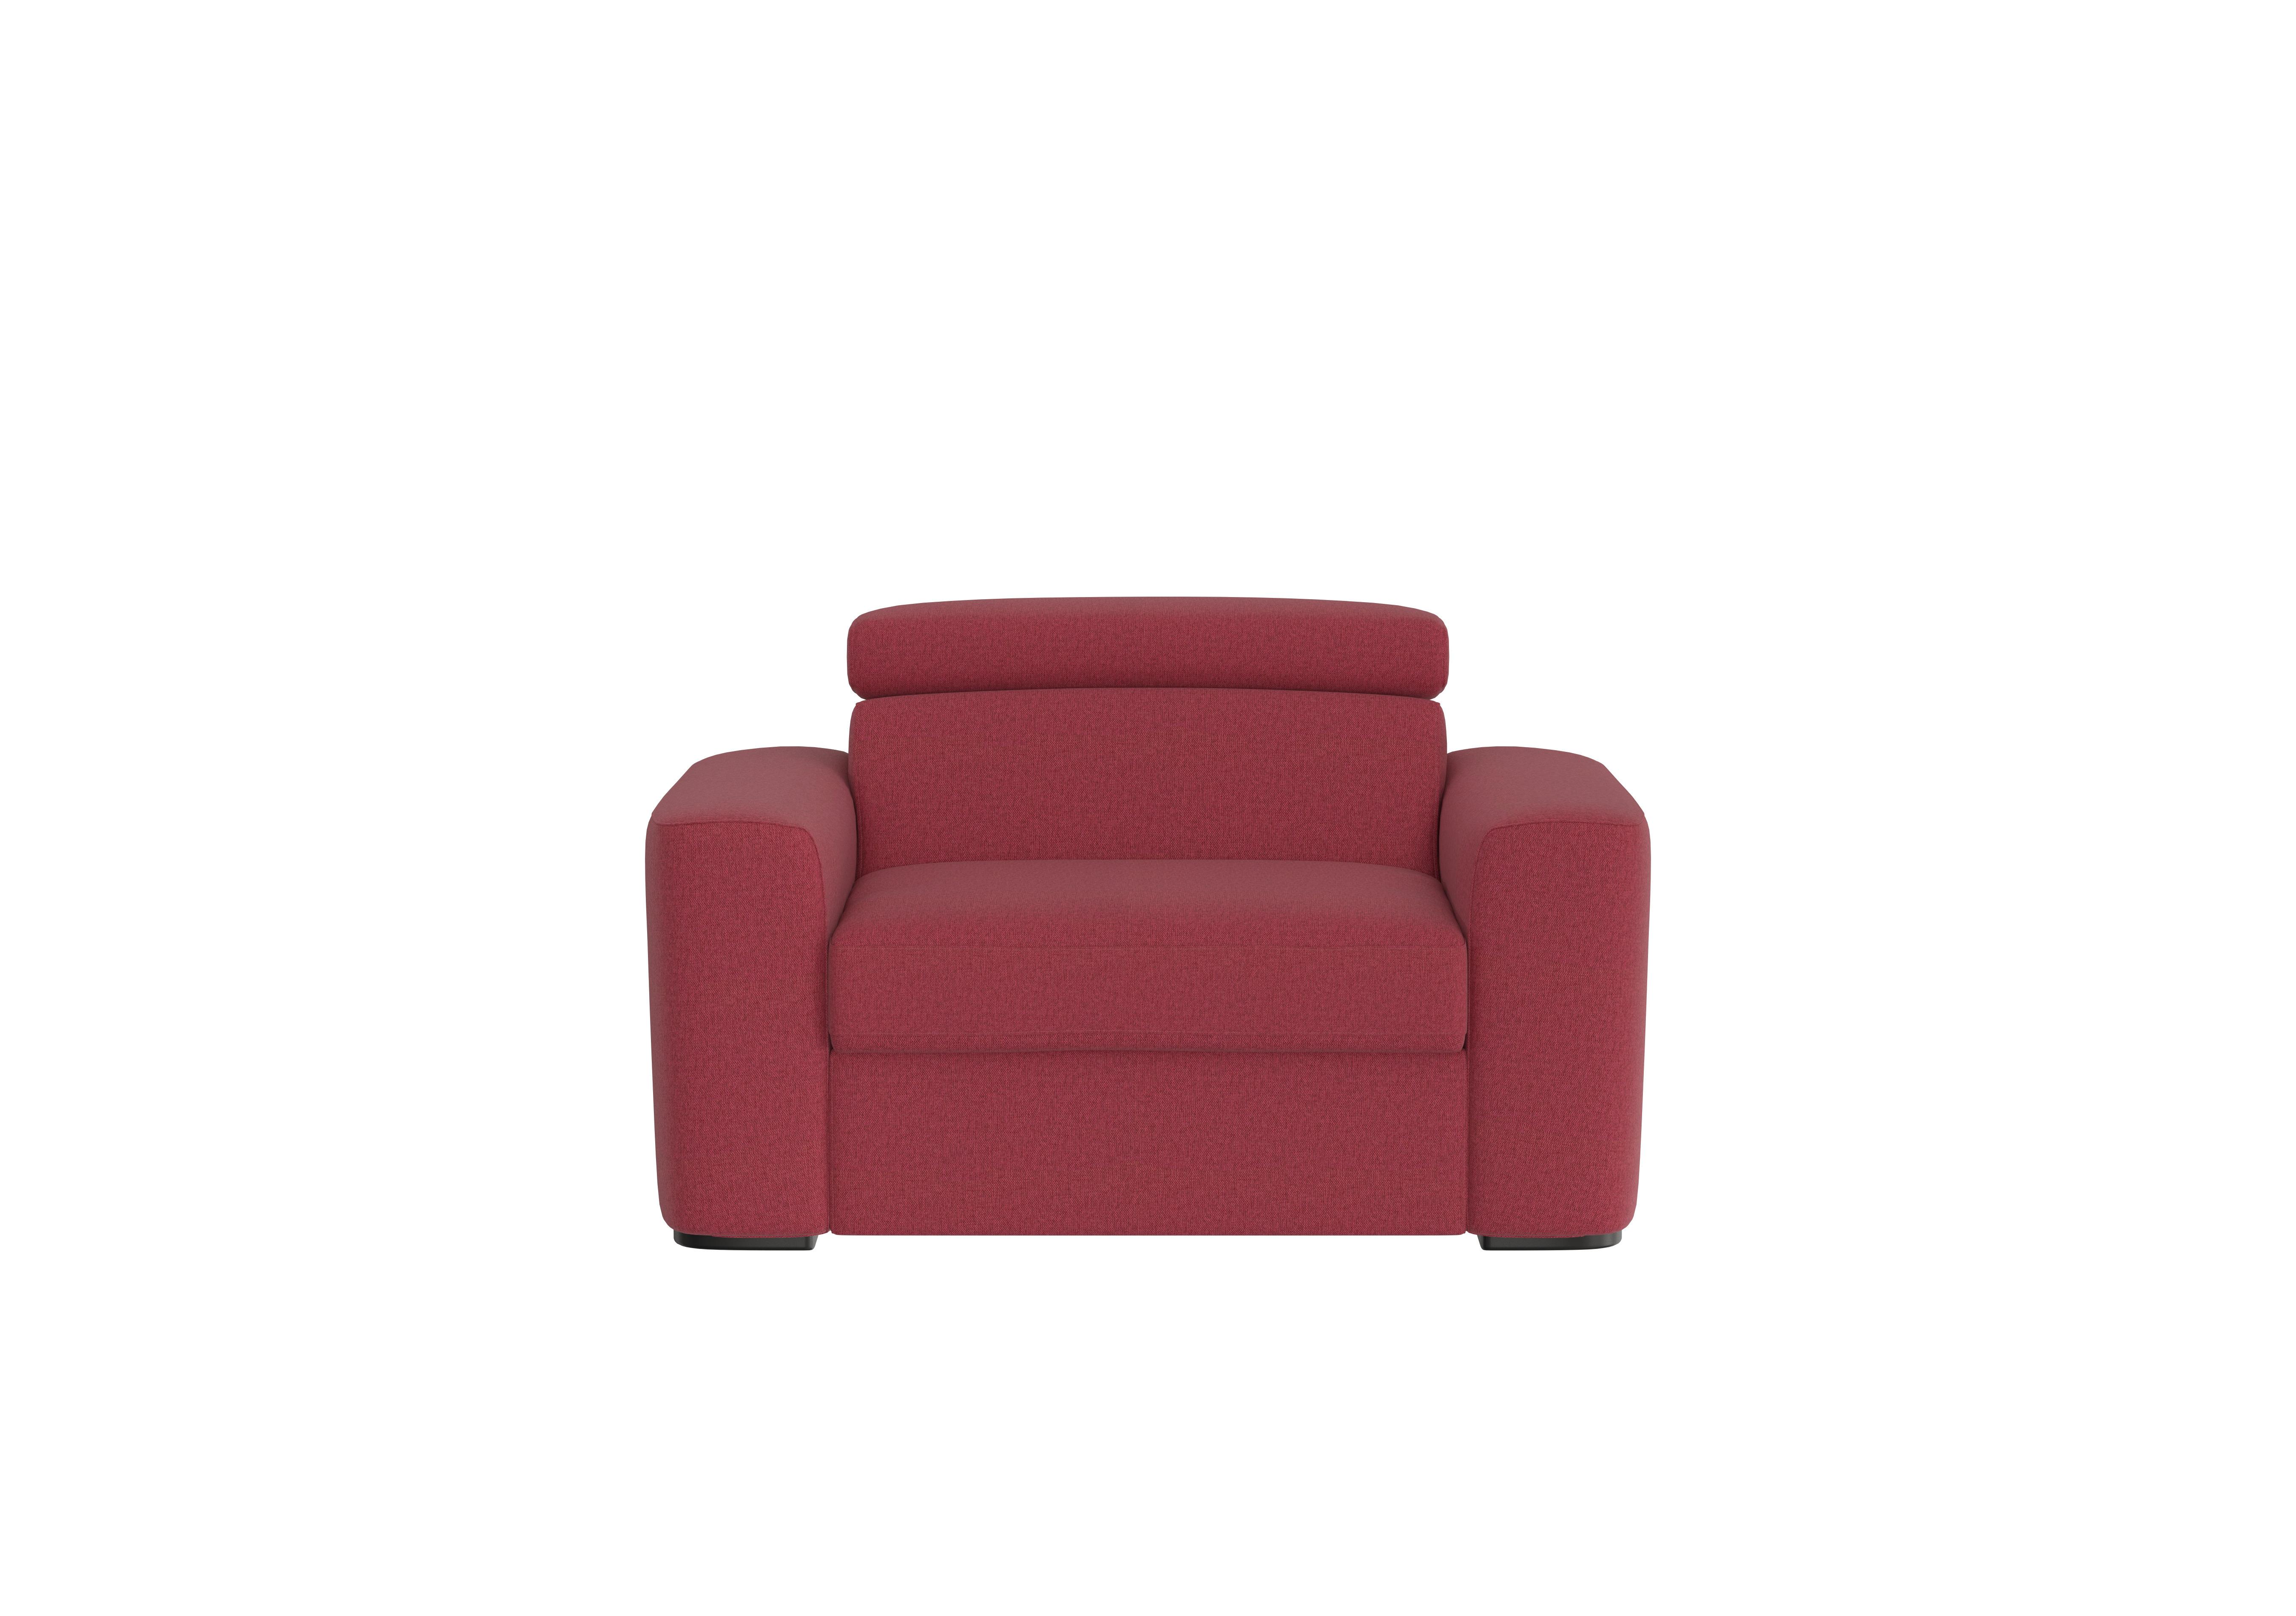 Infinity Fabric Chair Sofa Bed in Fab-Blt-R29 Red on Furniture Village